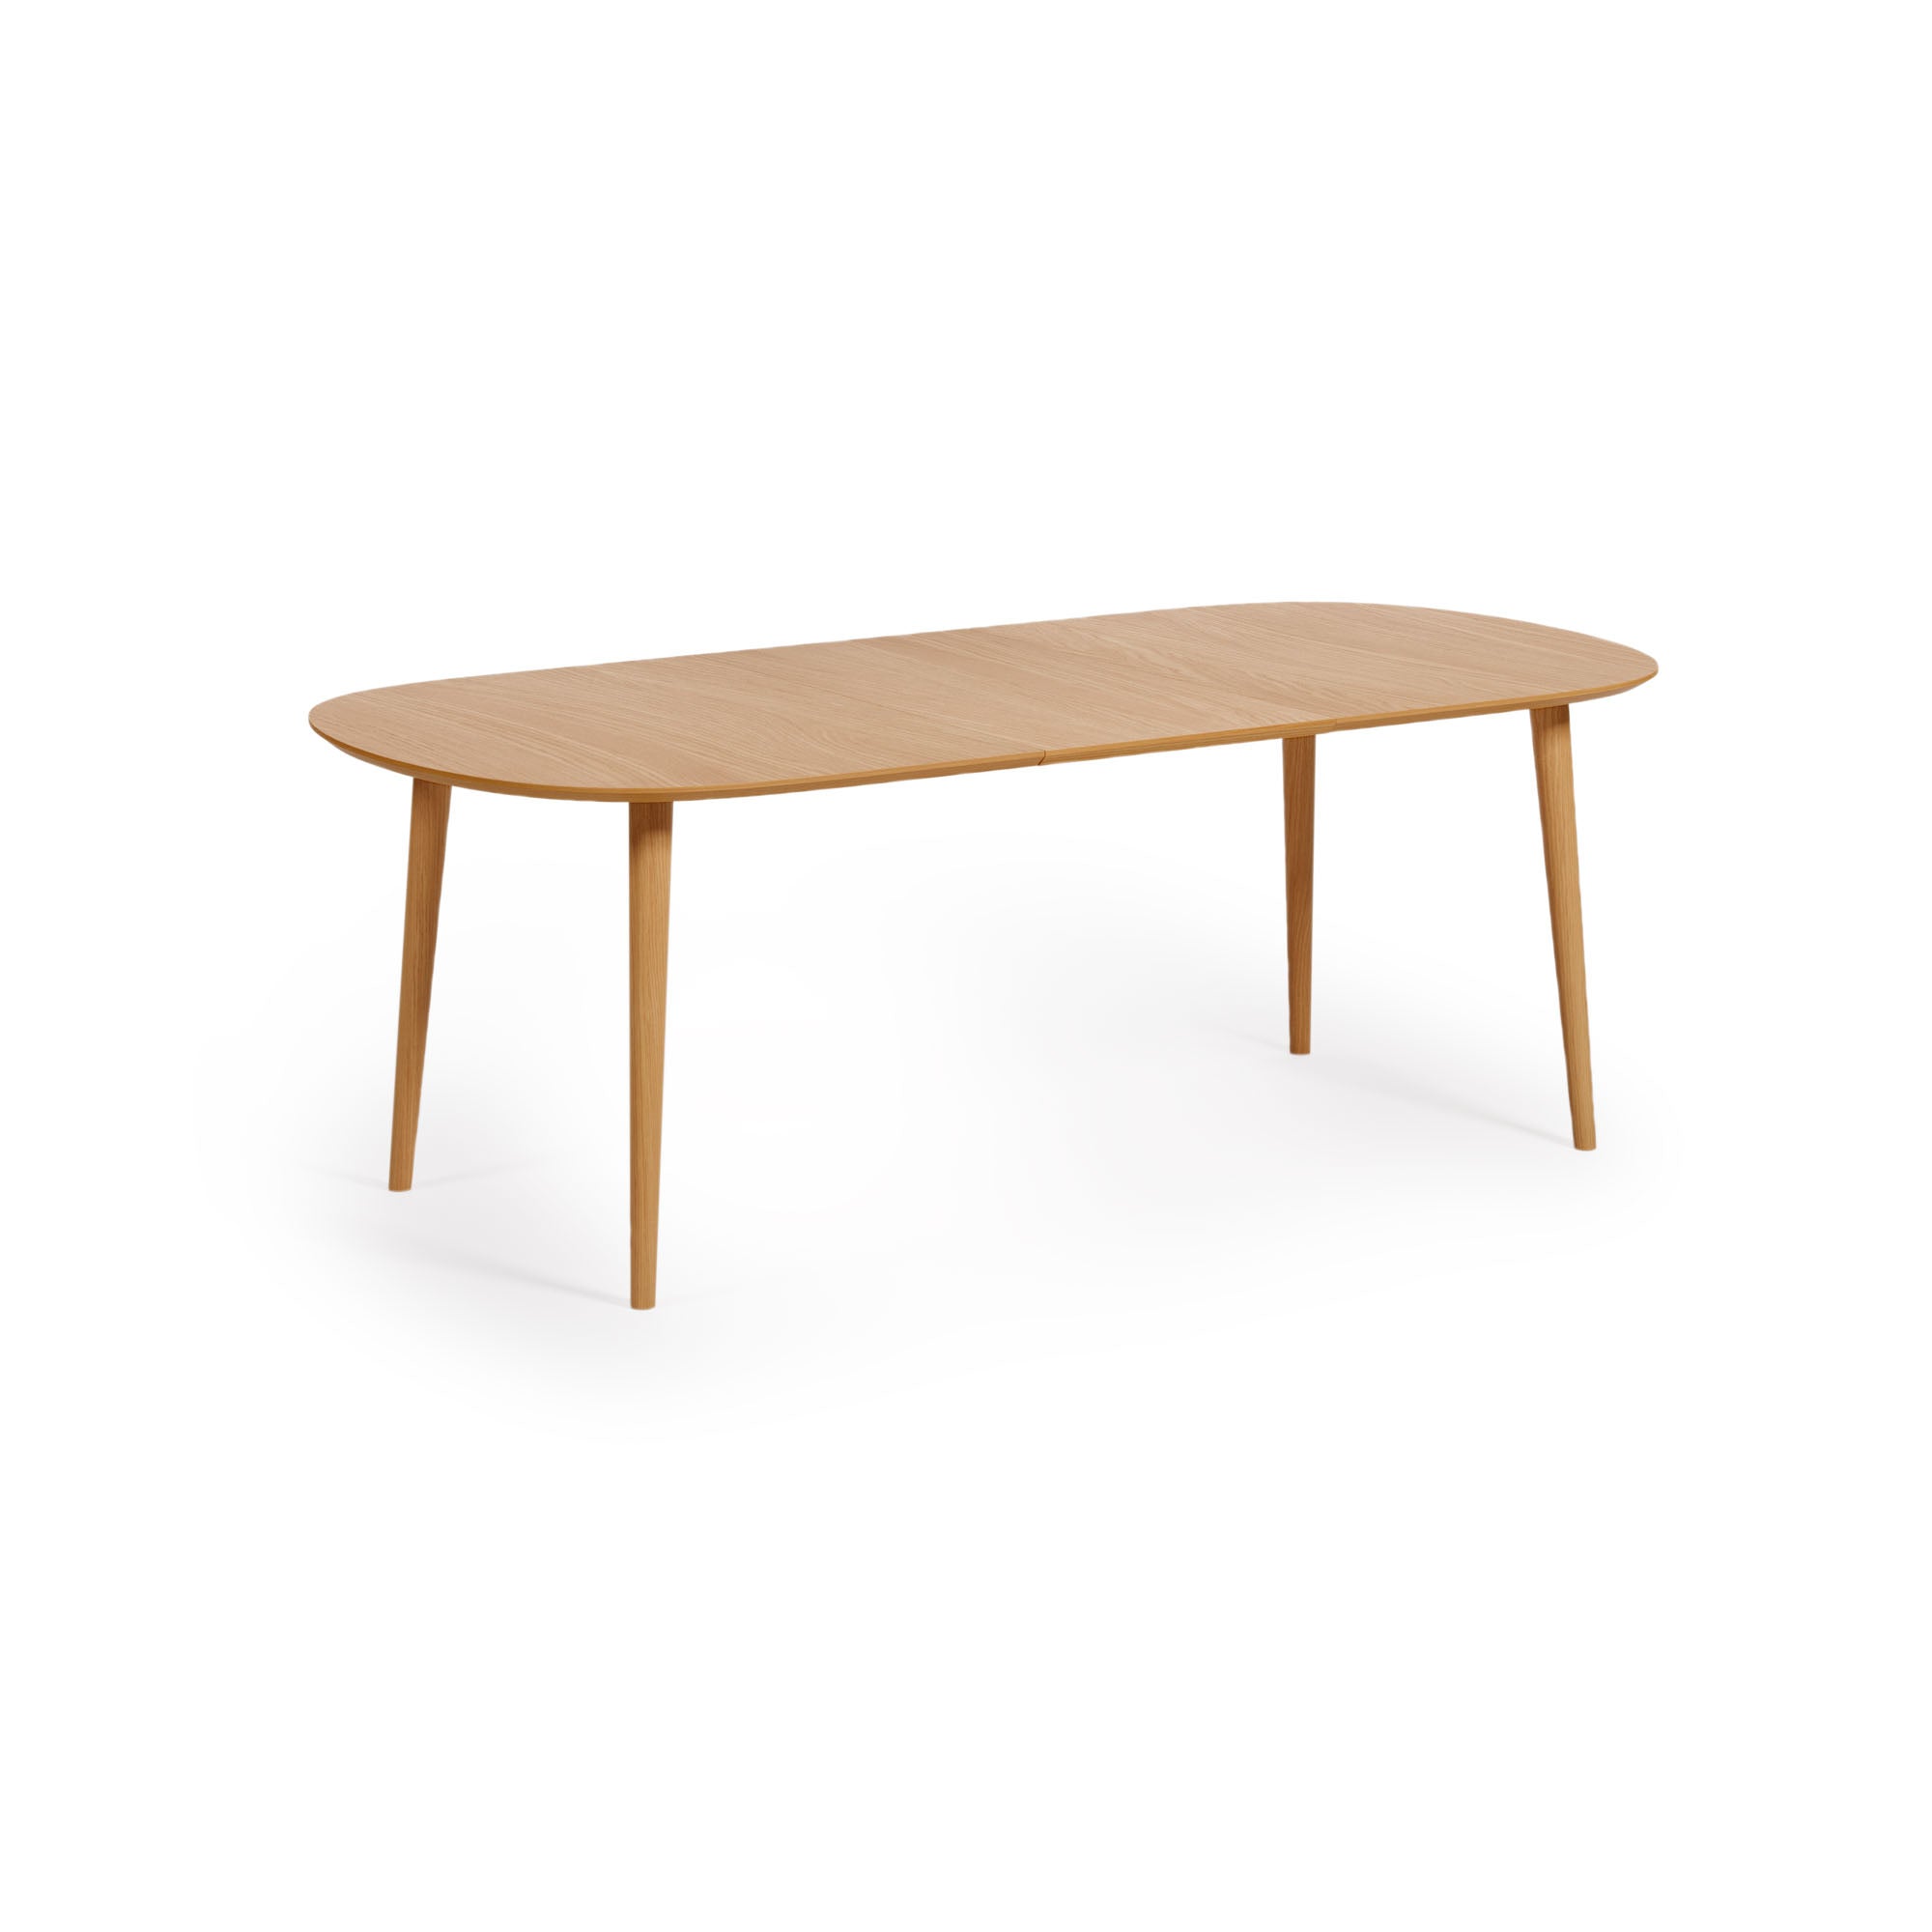 Oqui extendable oak veneer table with solid wood legs 160 (260) x 100 cm